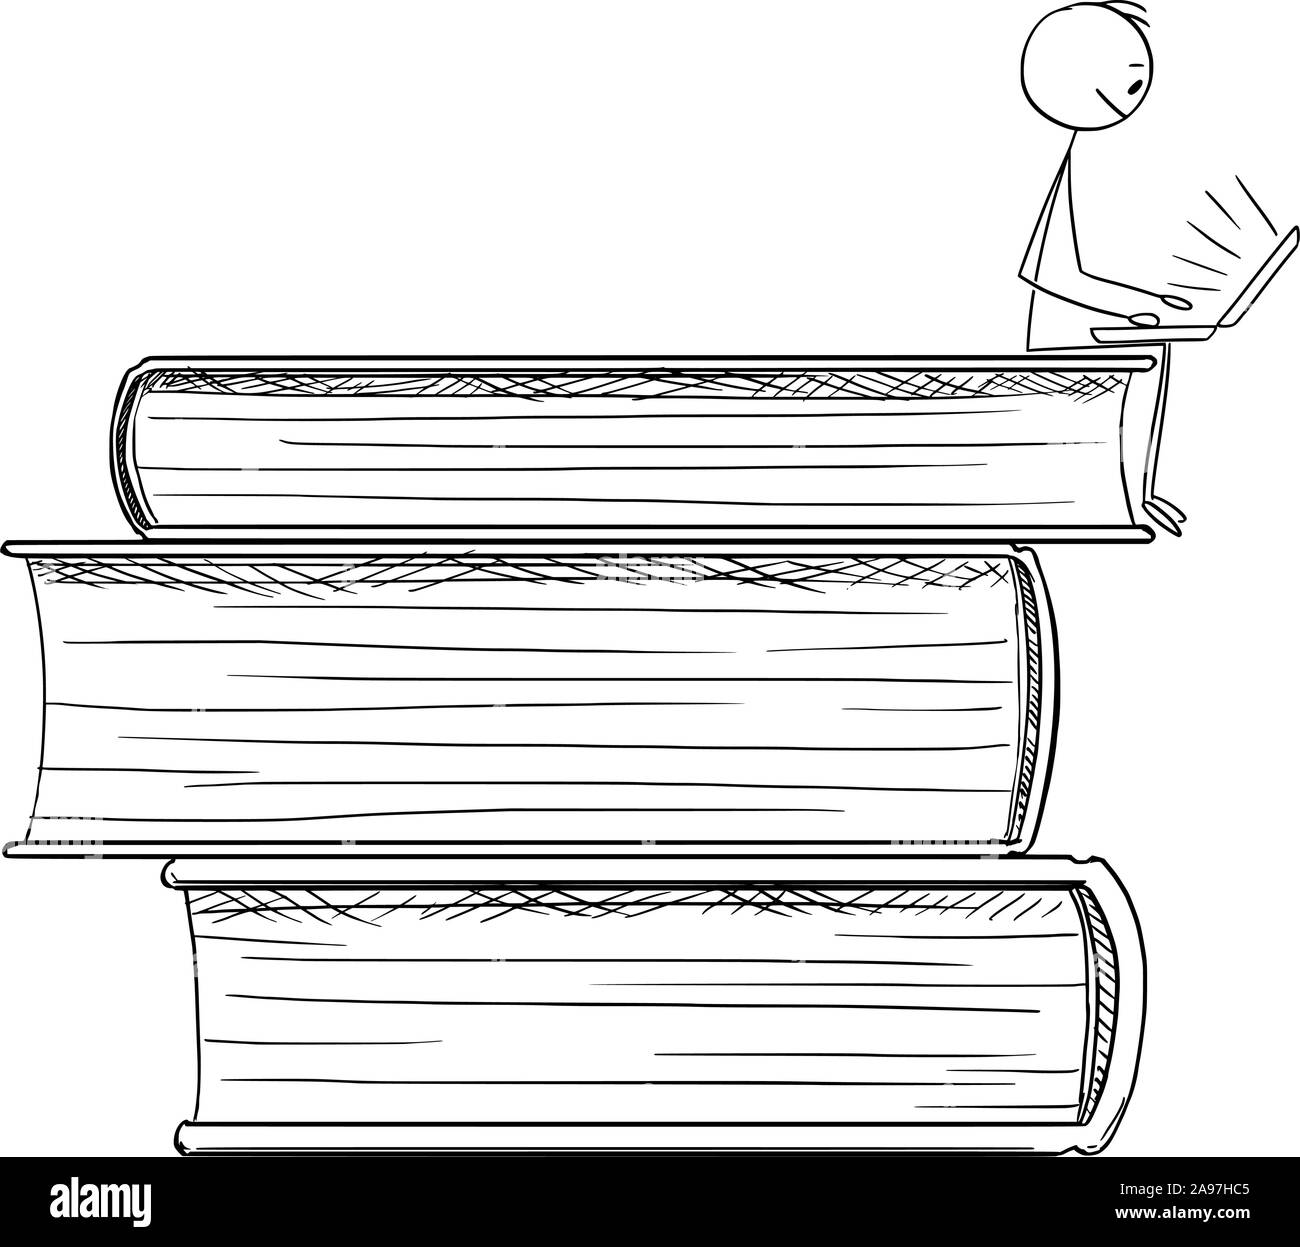 Vector cartoon stick figure drawing conceptual illustration of man sending on pile of big books and working or studying online on Internet on computer. Stock Vector